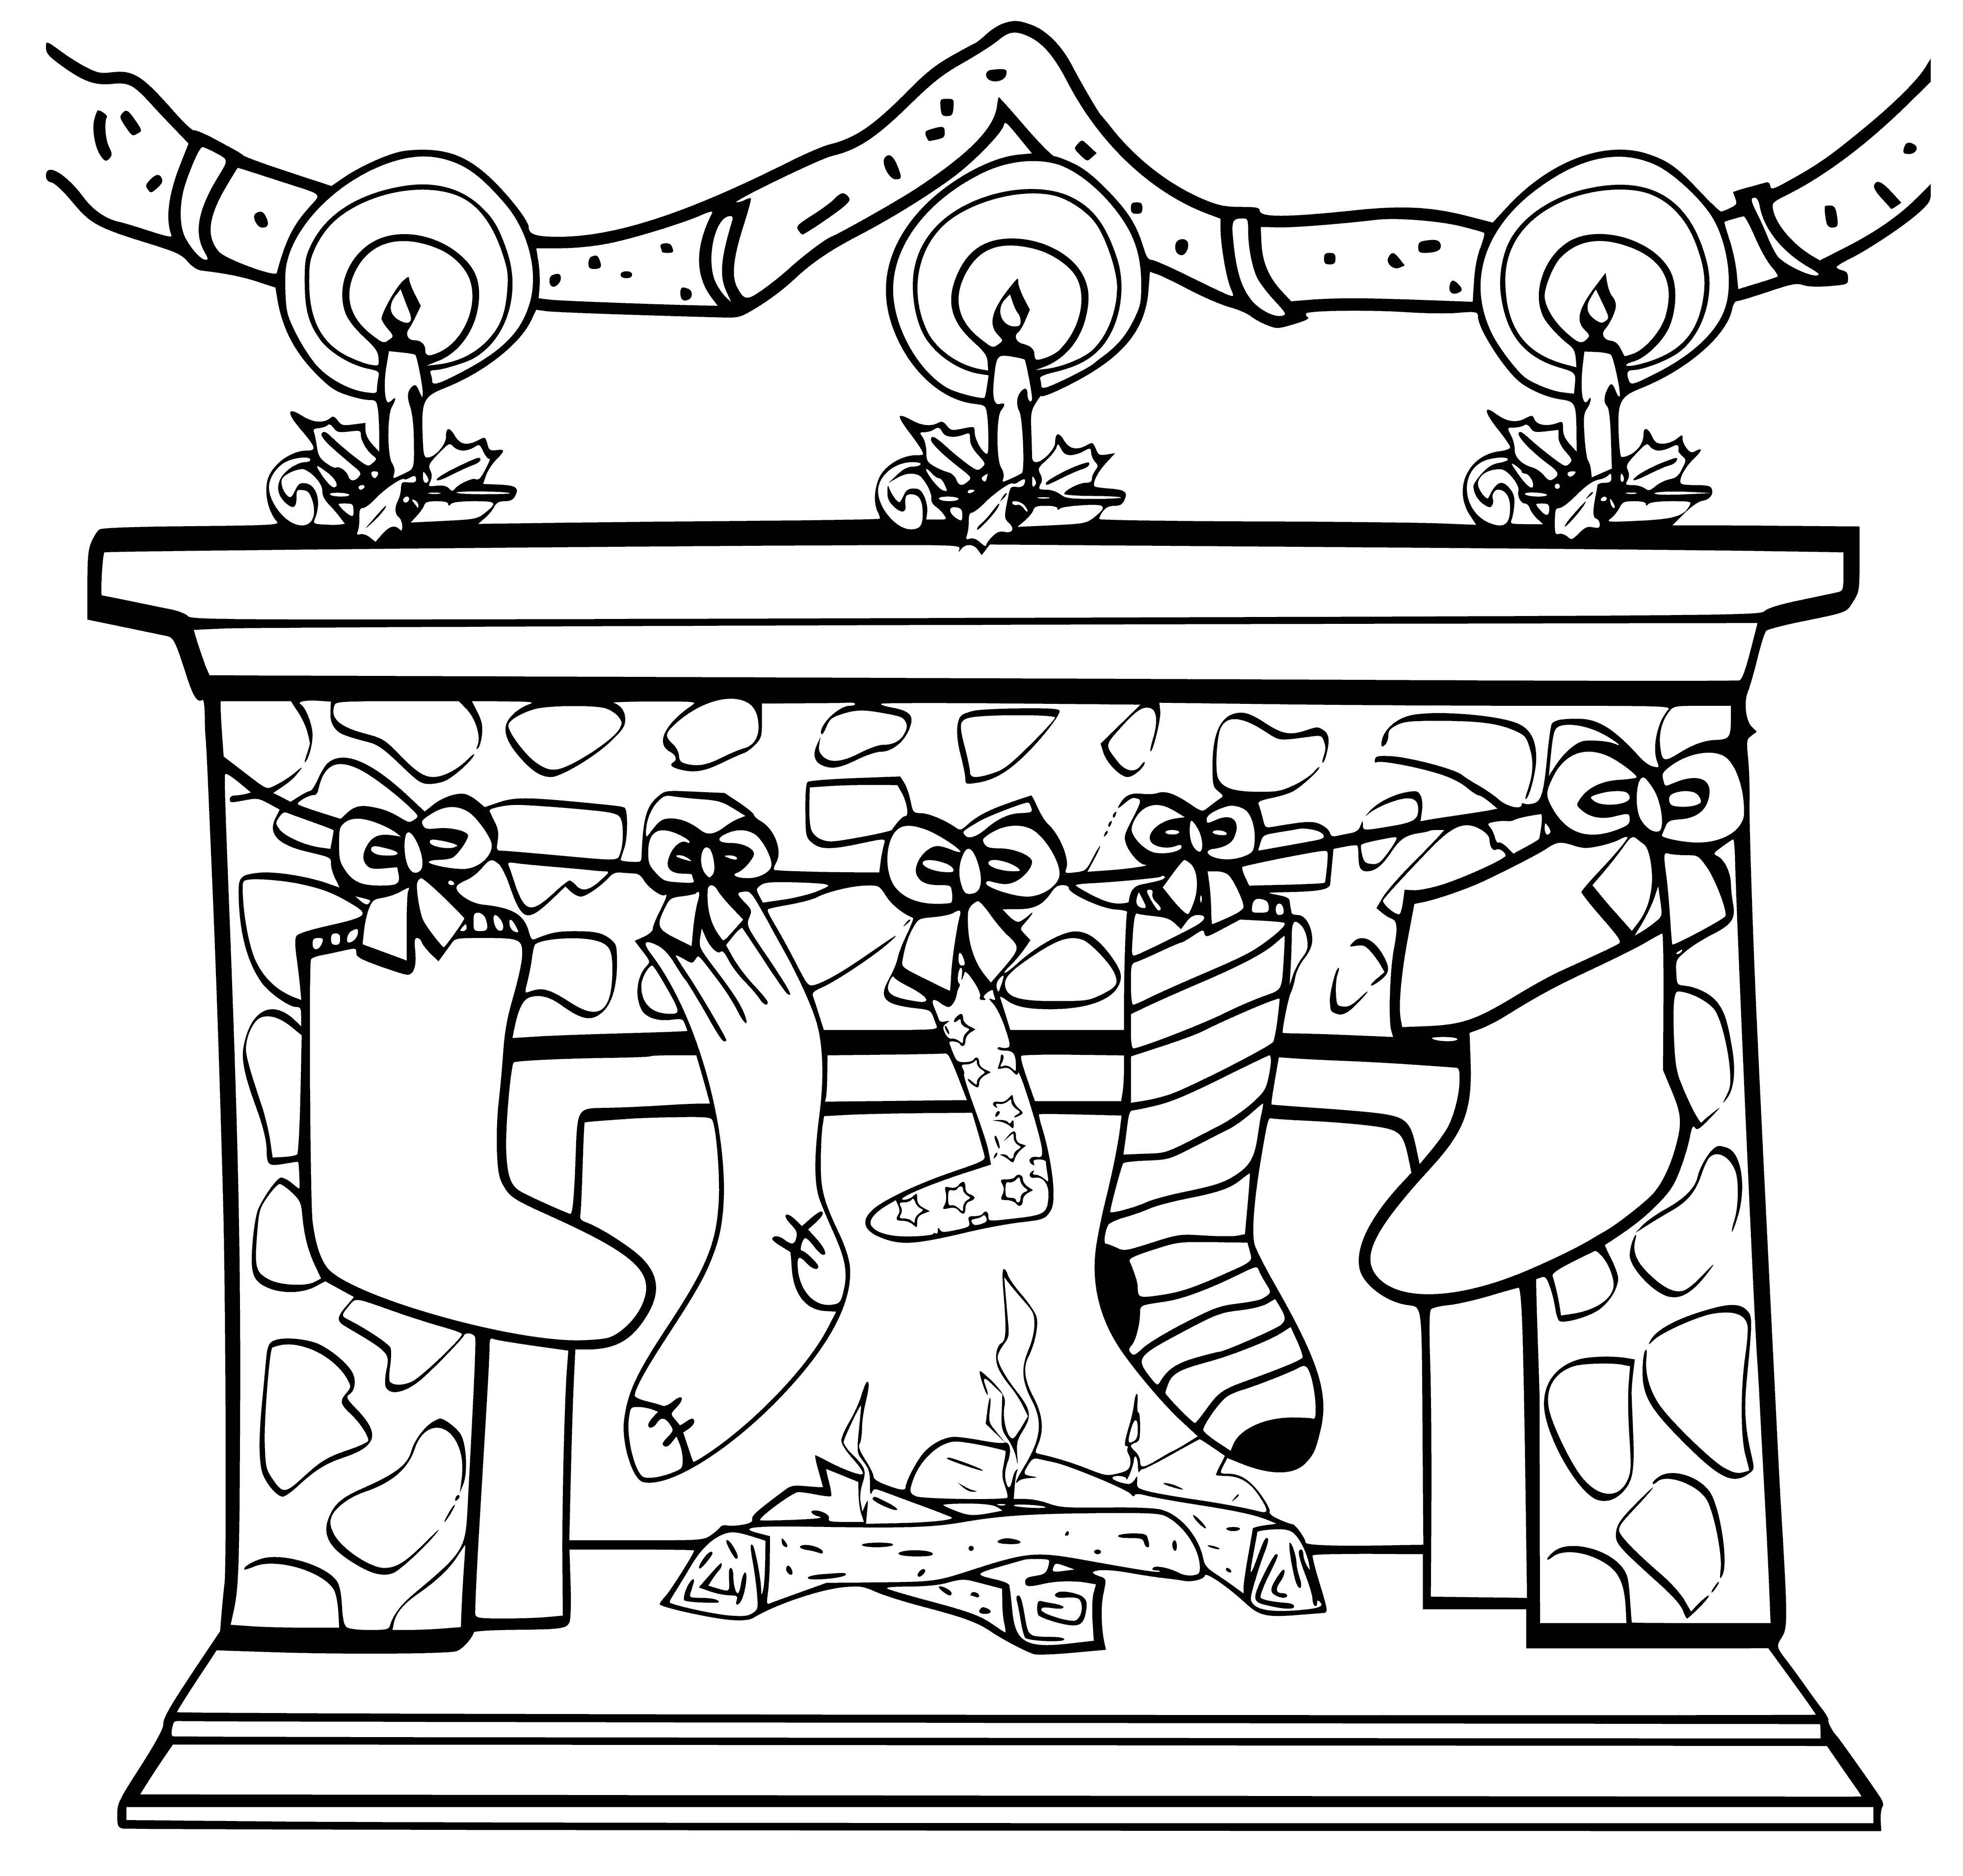 coloring page: Christmas stockings: Red with white stripes & green/gold bows. Festive and fun!